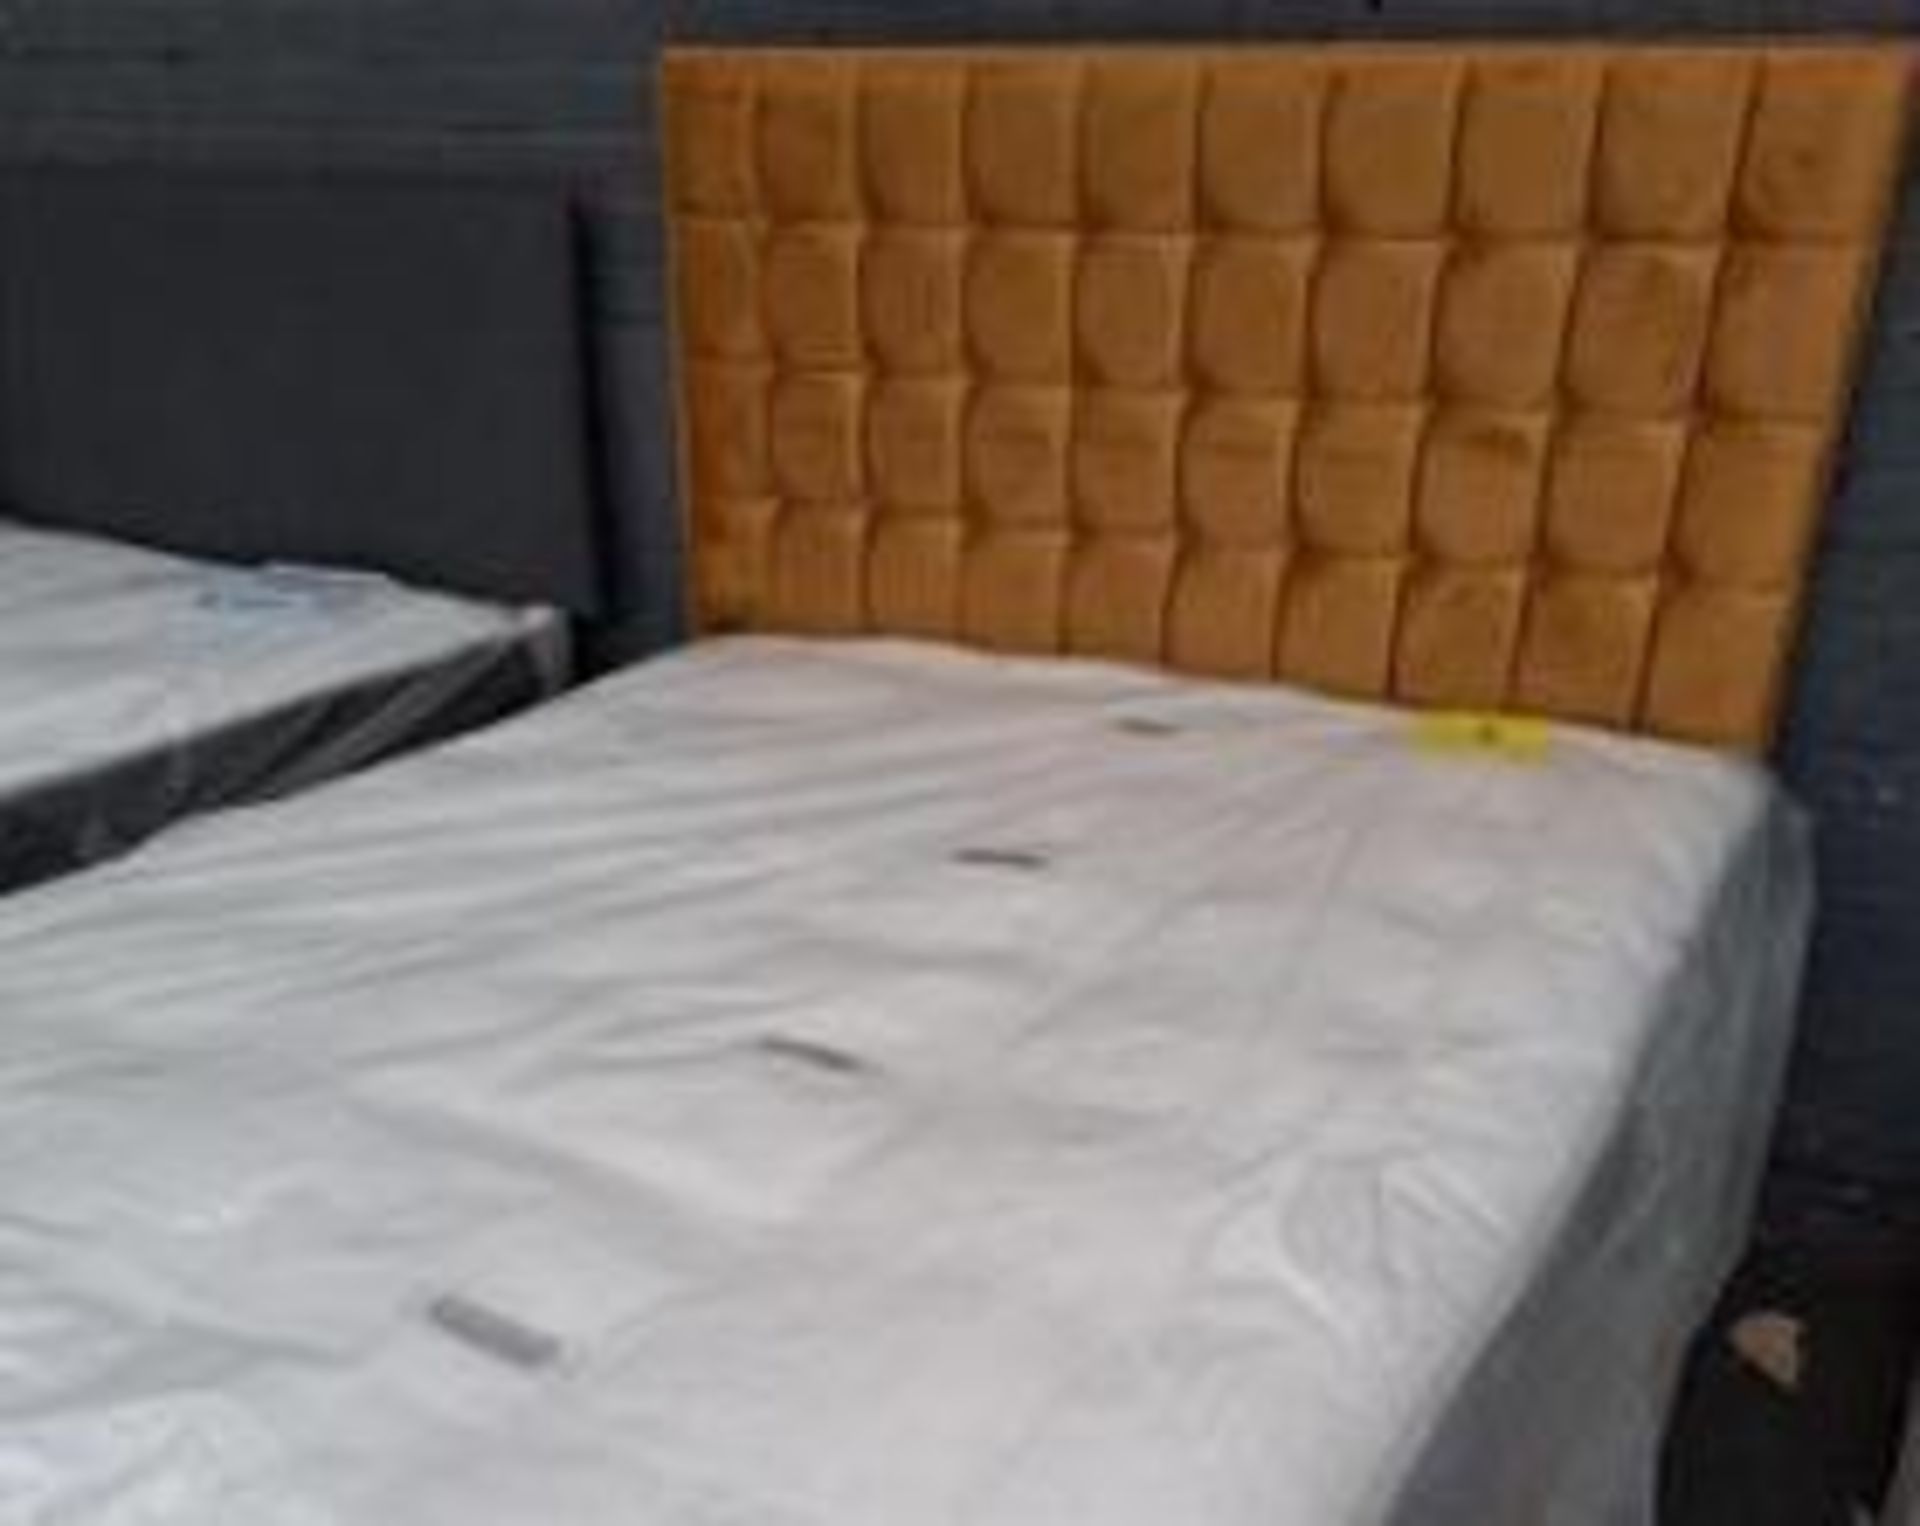 *EX DISPLAY* Furniture village Dice sleep story king size ottoman divan bed and mattress. - Image 2 of 2